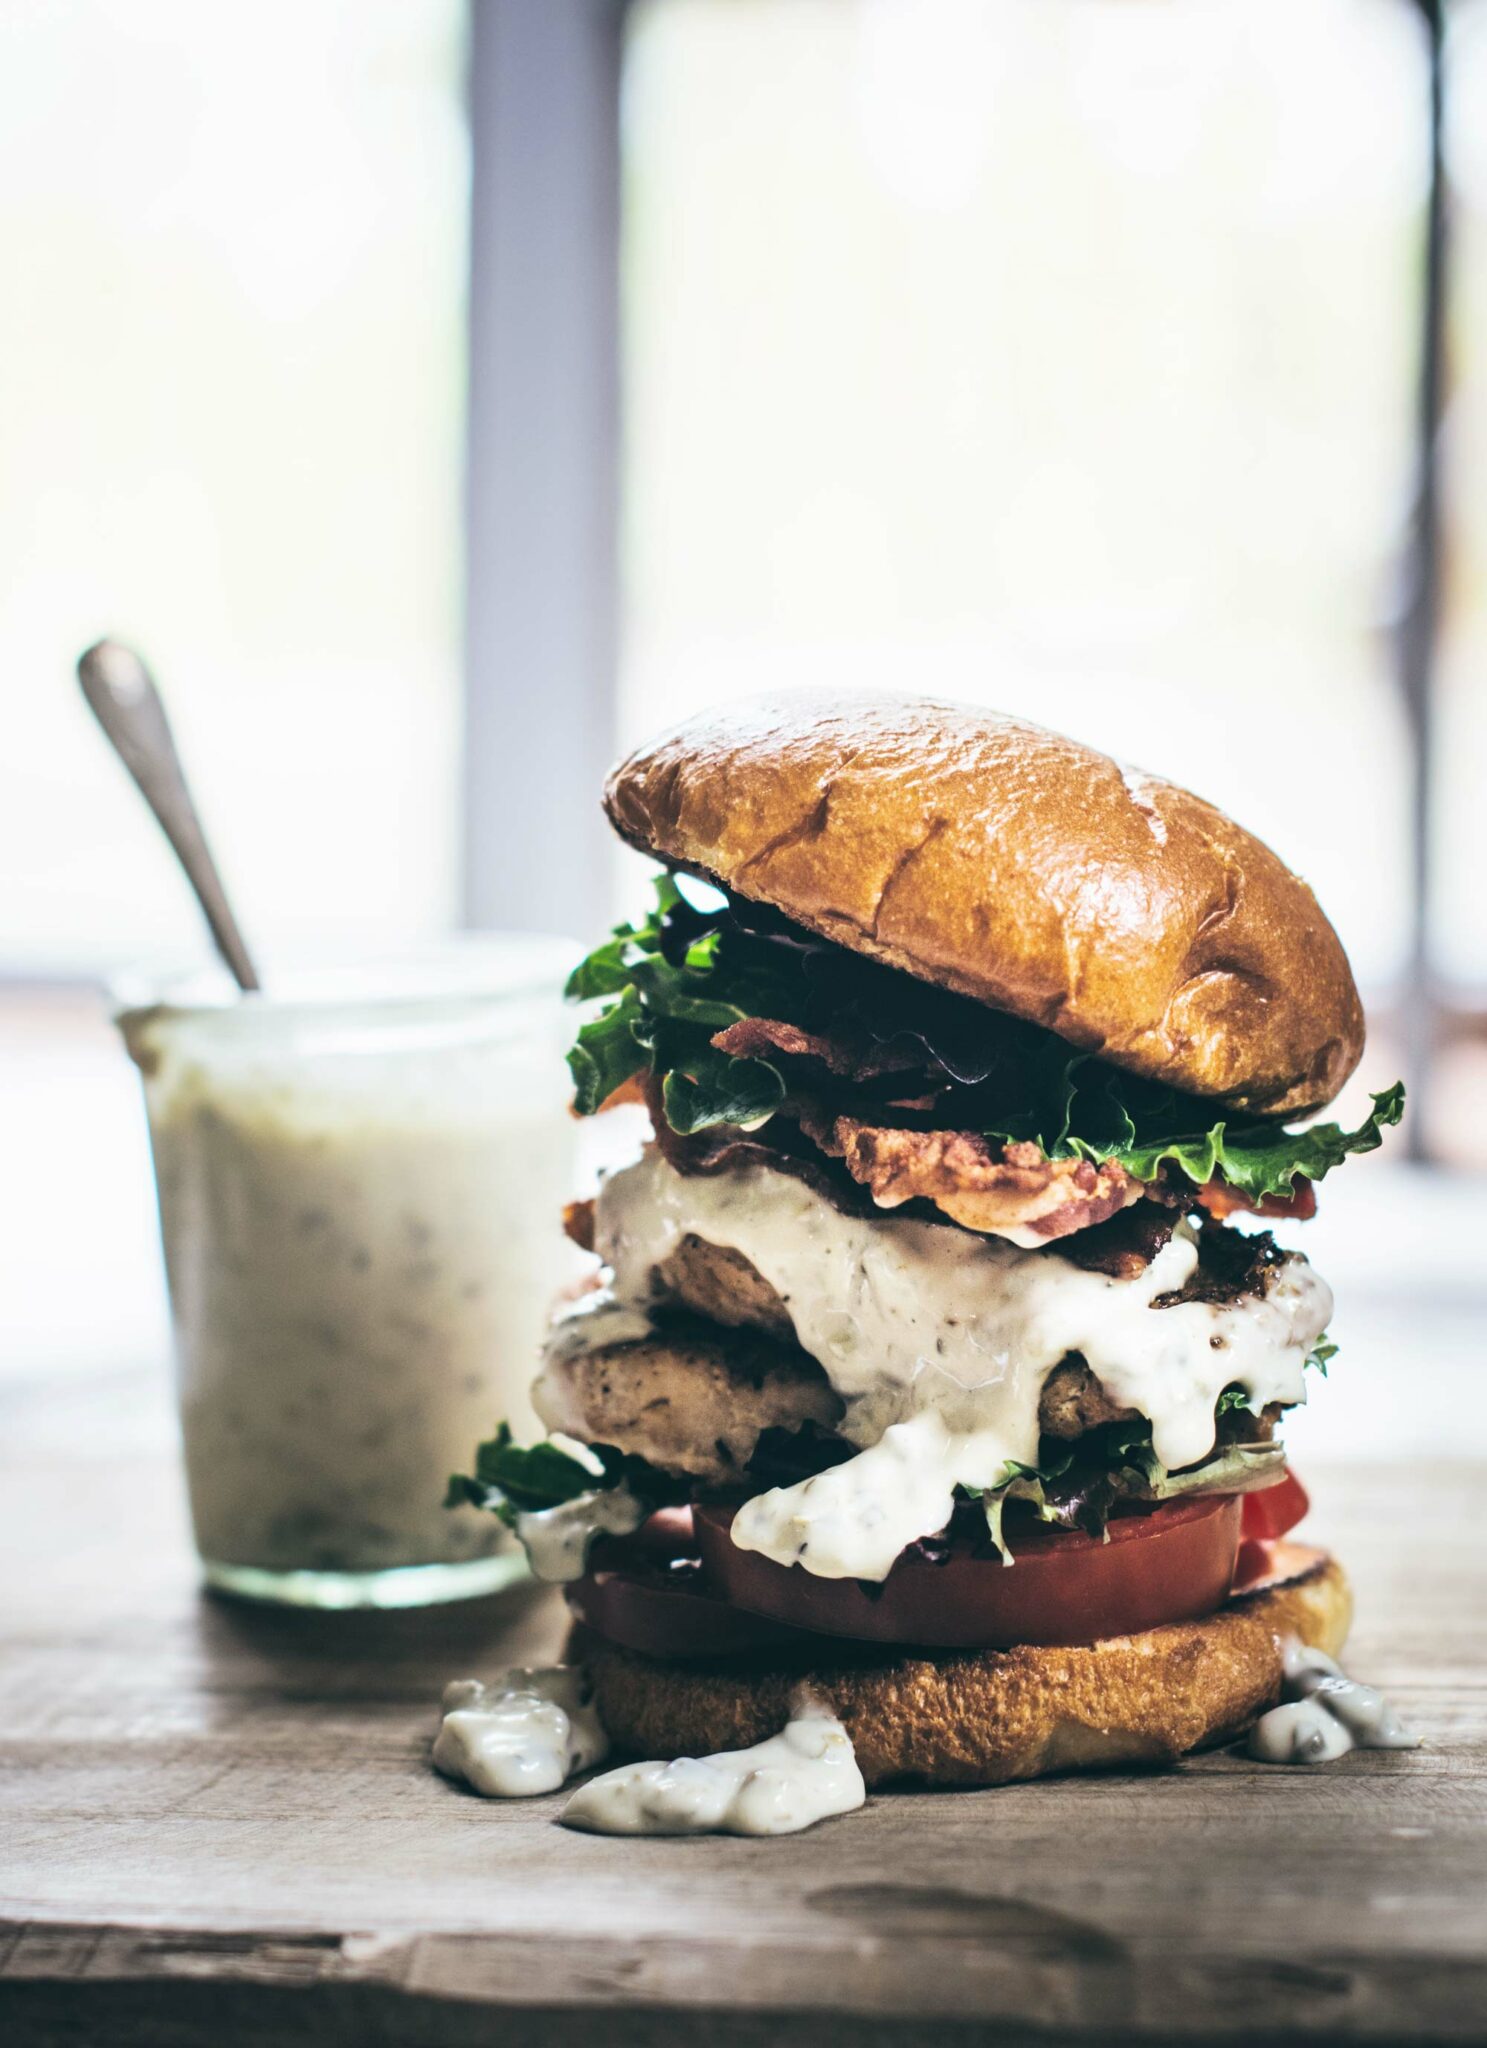 Blackened Salmon Burger with jar of caper remoulade.